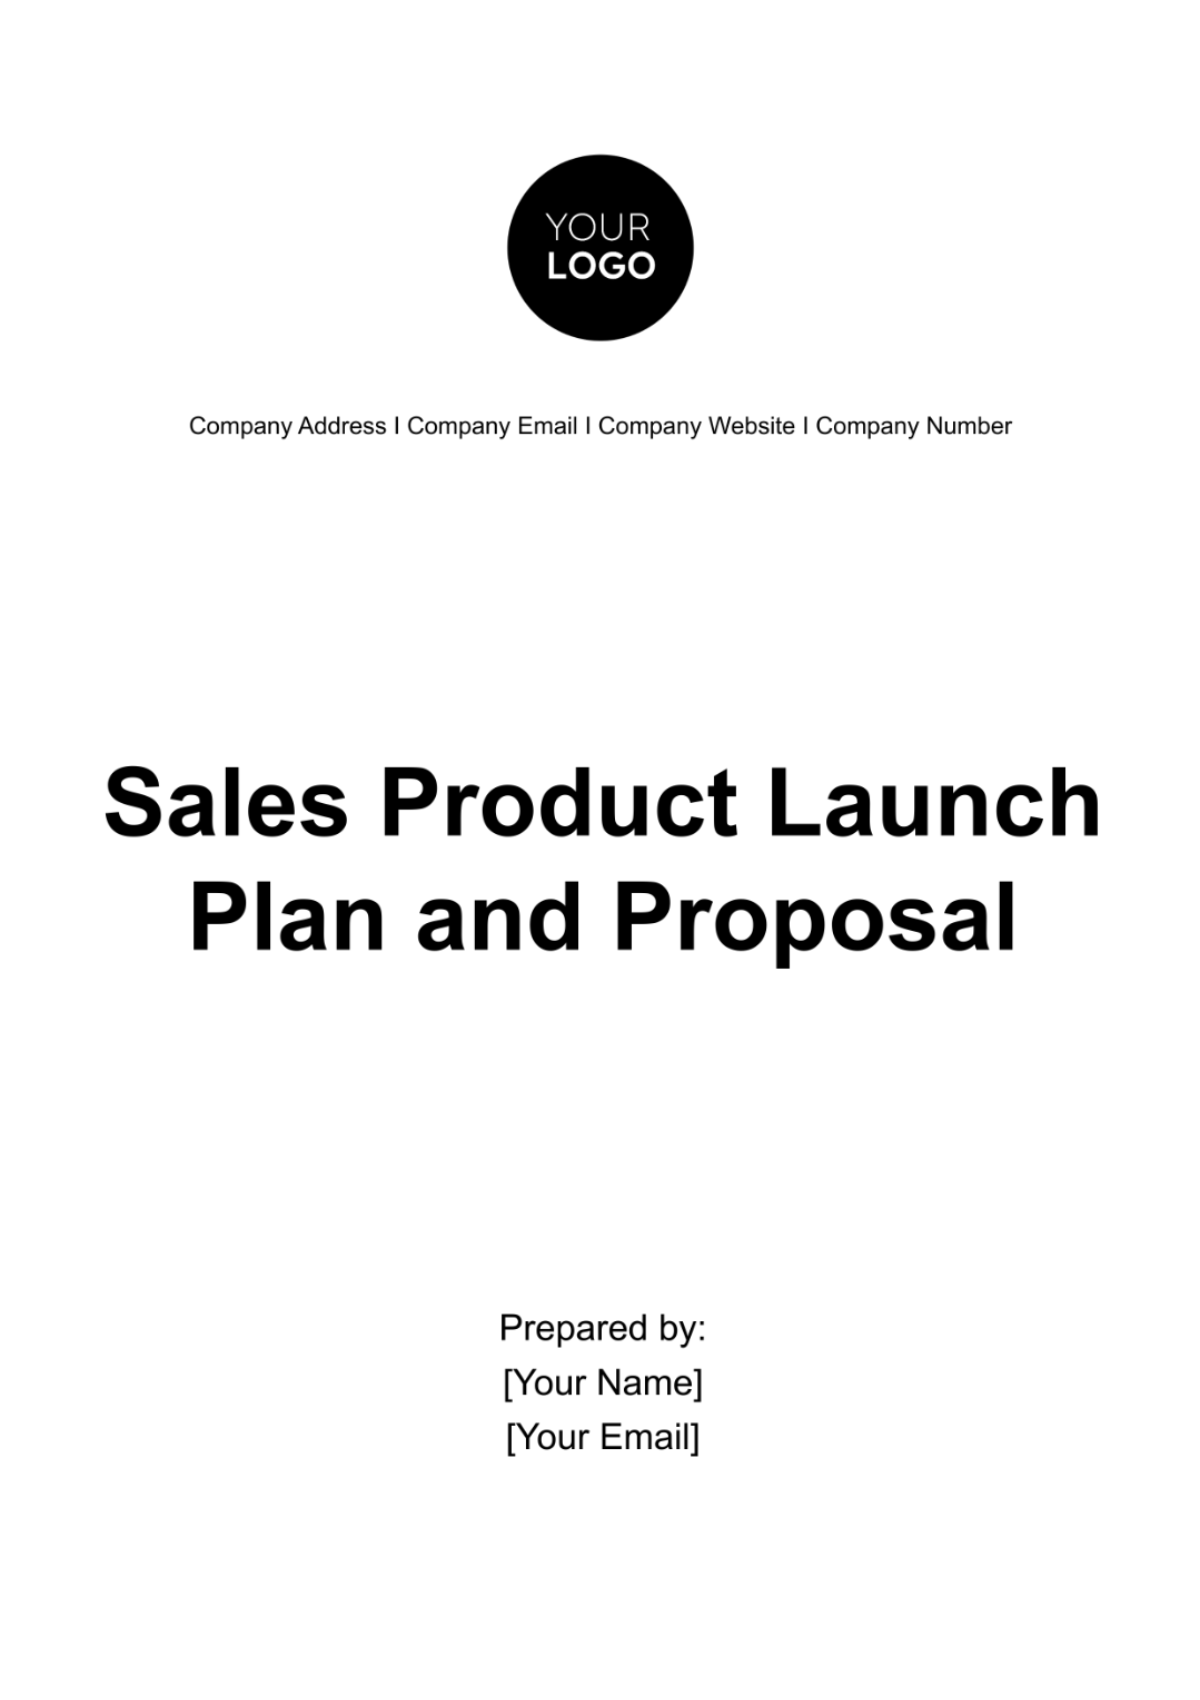 Sales Product Launch Plan and Proposal Template